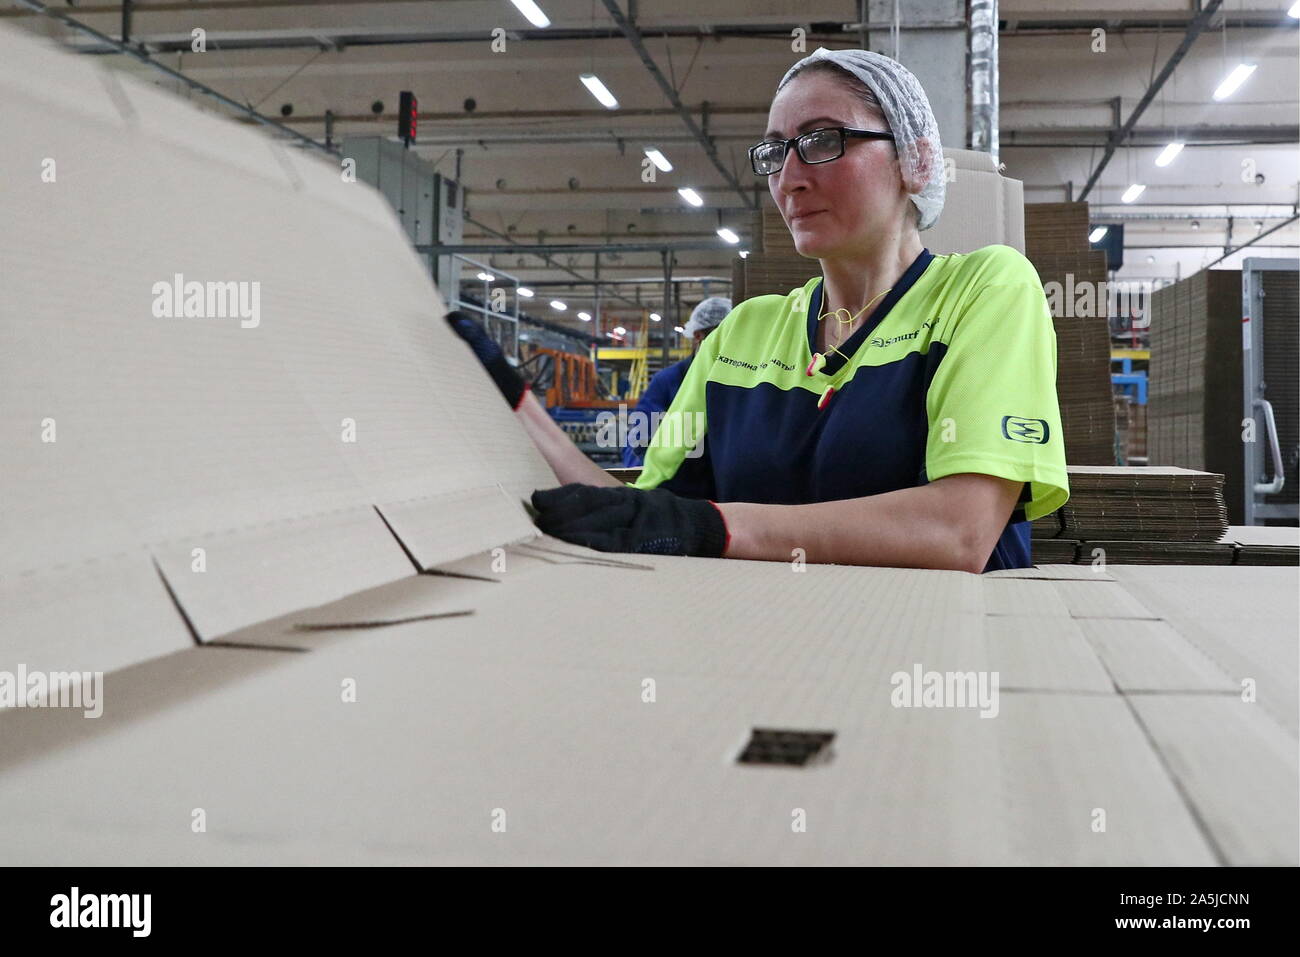 Moscow, Russia. 21st Oct, 2019. MOSCOW, RUSSIA - OCTOBER 21, 2019: An  employee at the Smurfit Kappa